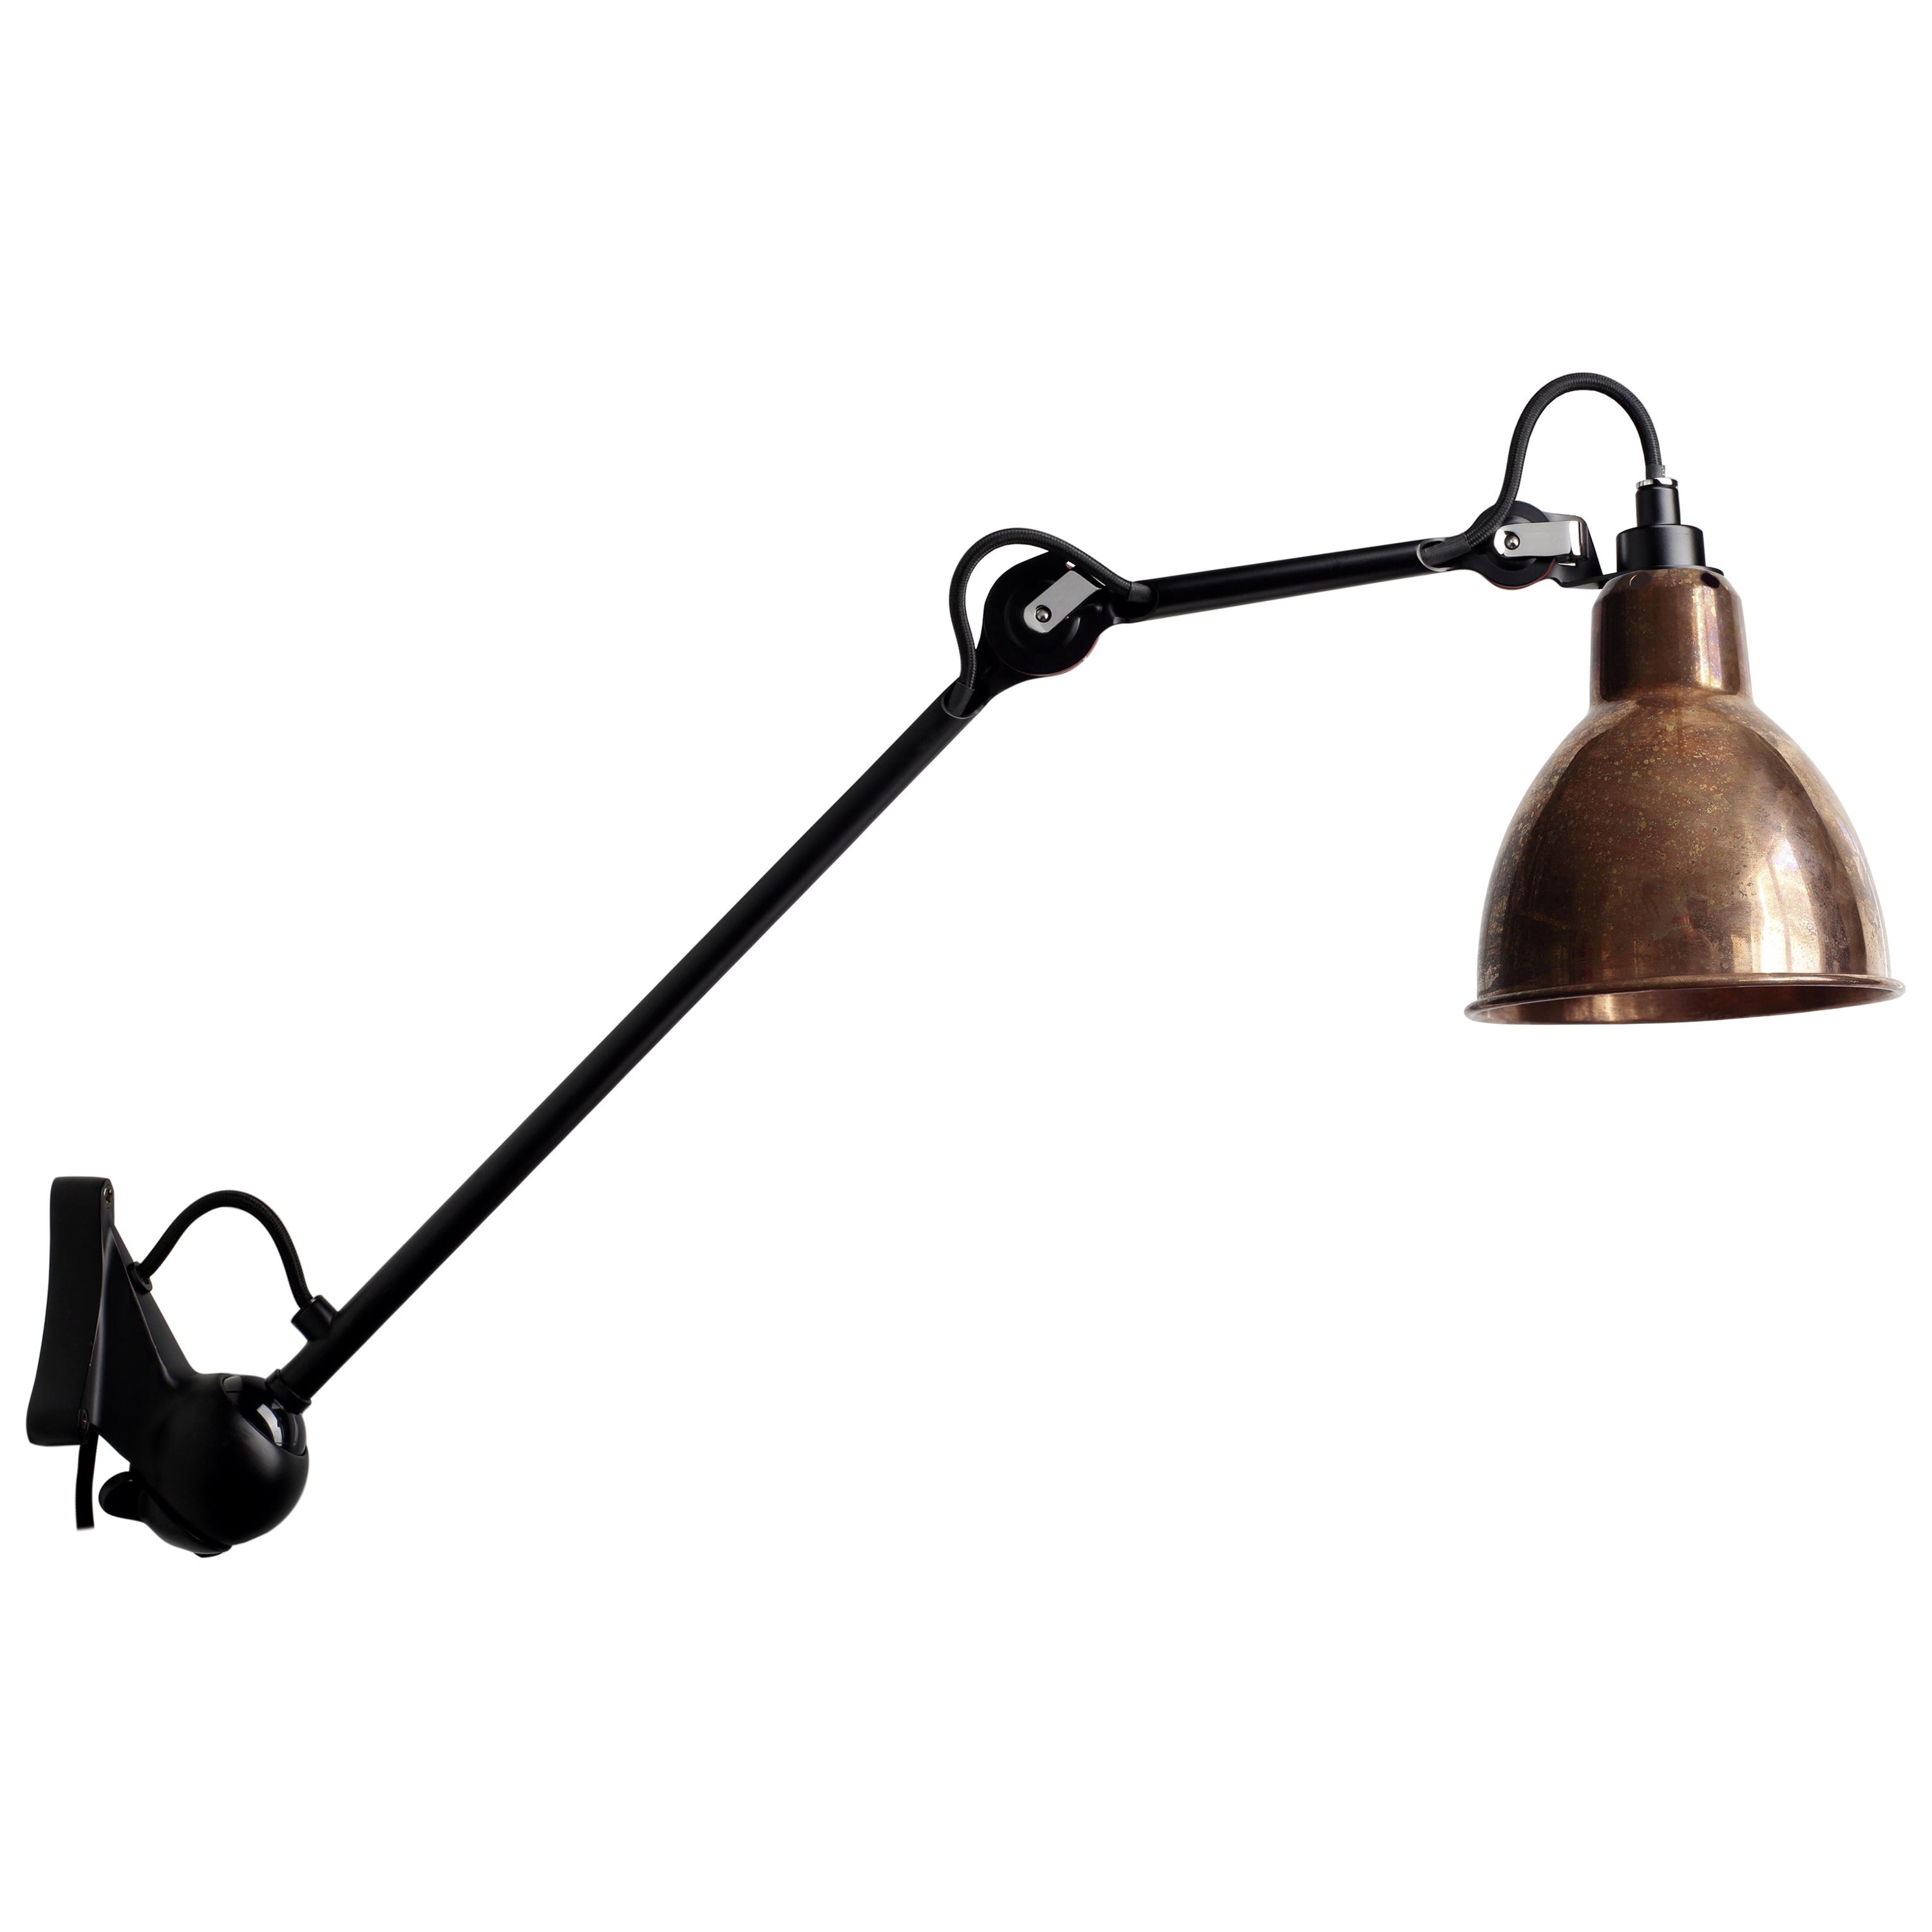 DCW Editions La Lampe Gras N°222 Wall Lamp in Black Arm and Raw Copper Shade For Sale